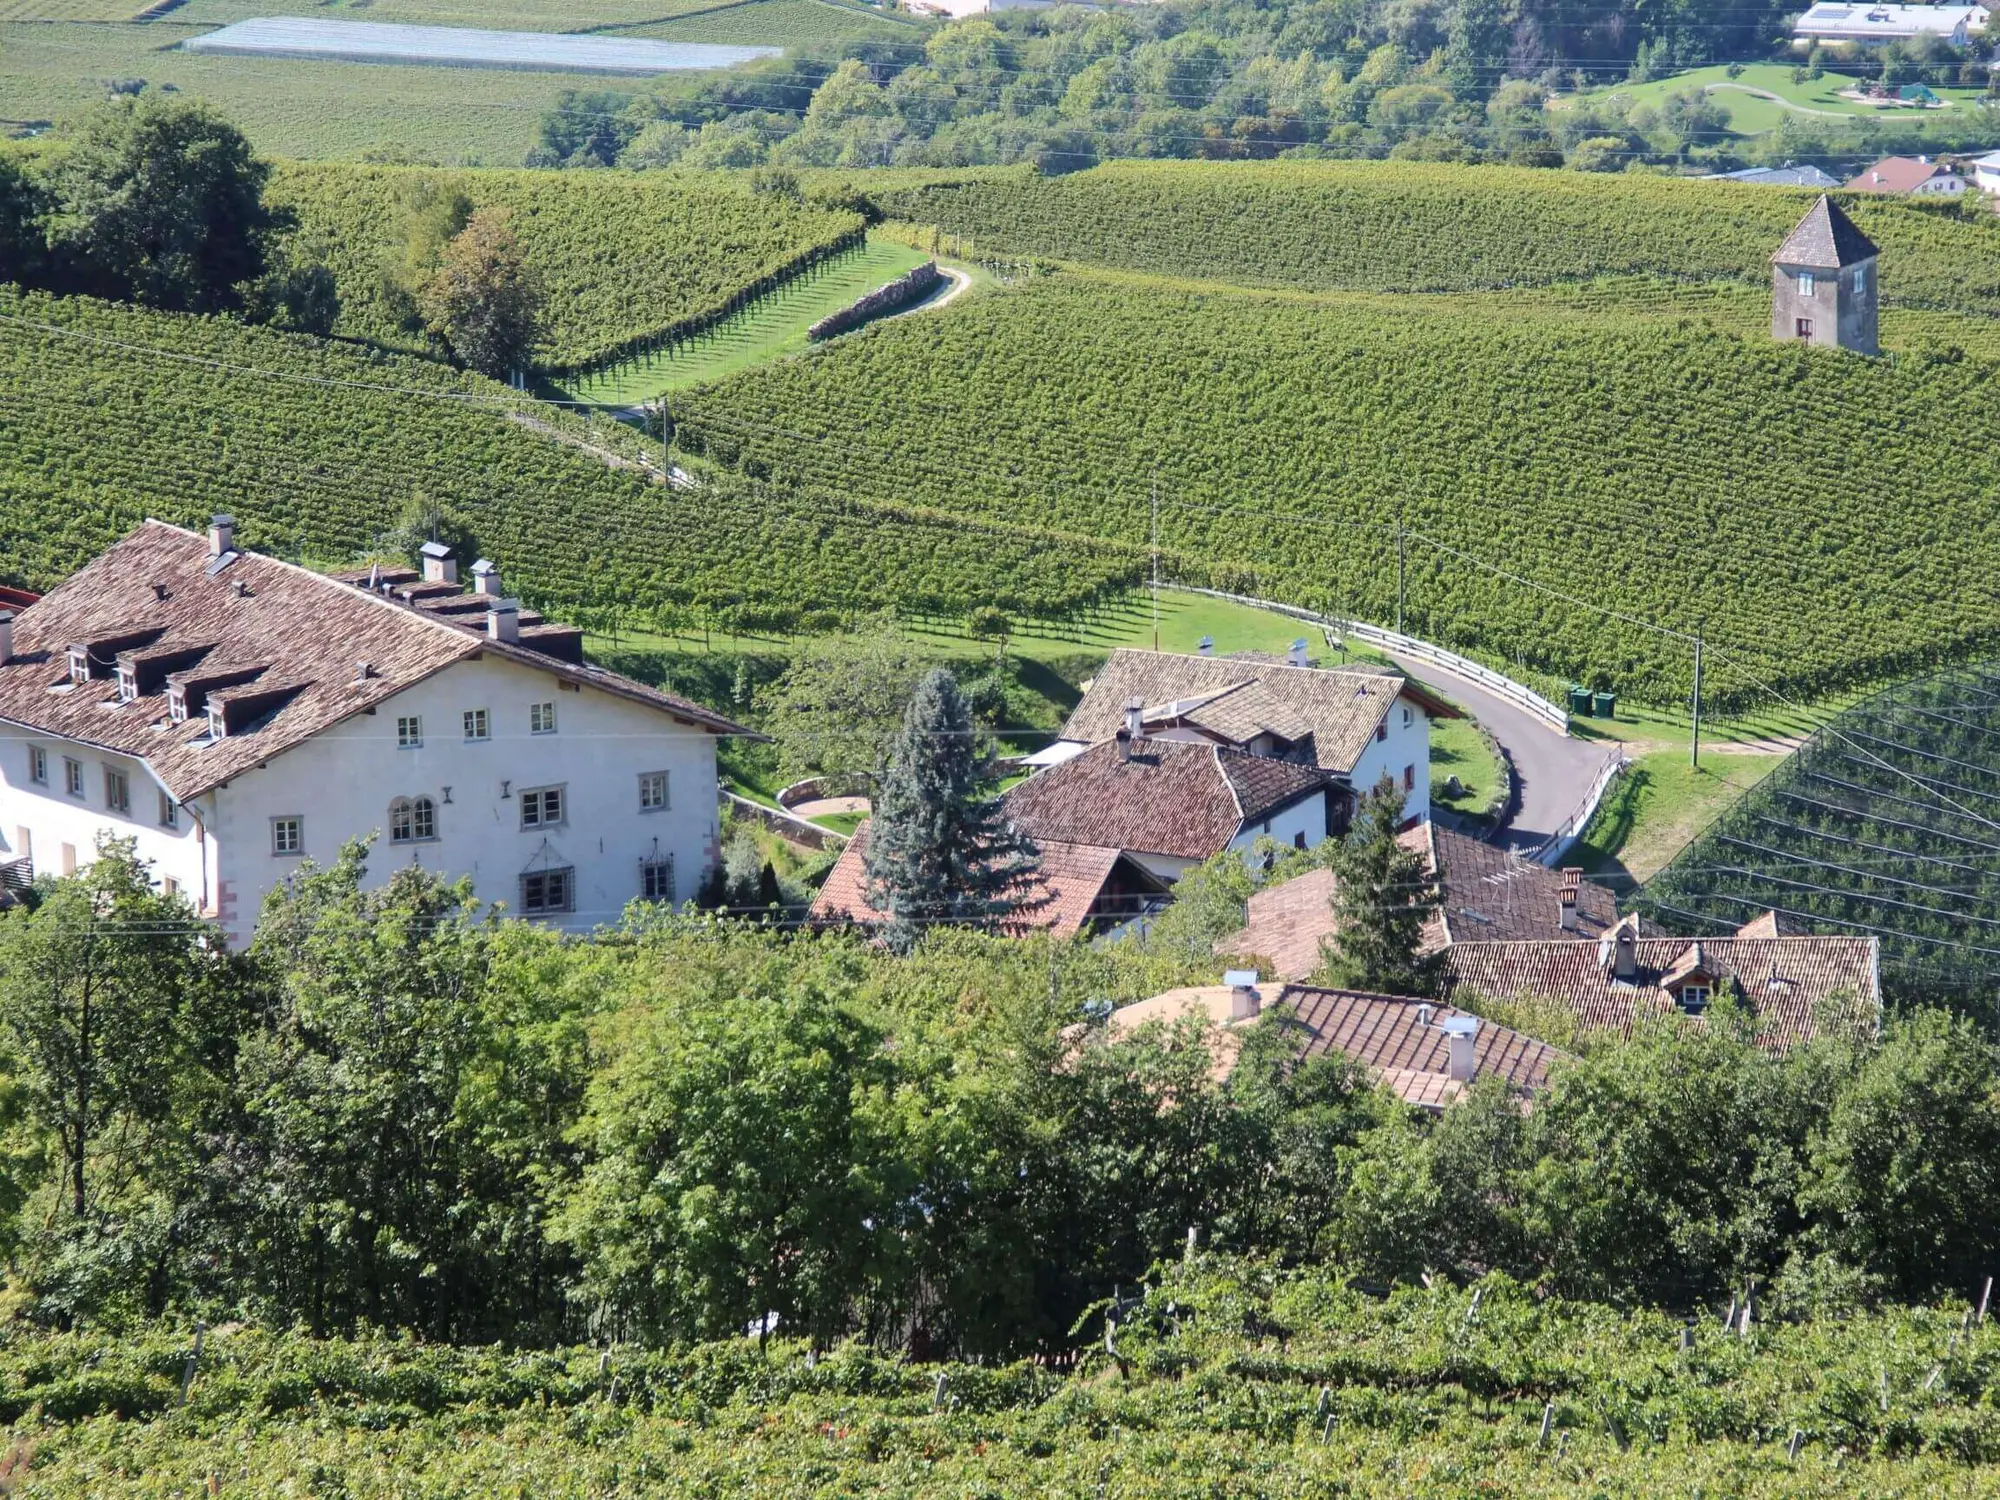 View from above of a small hamlet and the vineyards of Weingut RADOIN 1560 in South Tyrol (c) photo Weingut RADOIN 1560